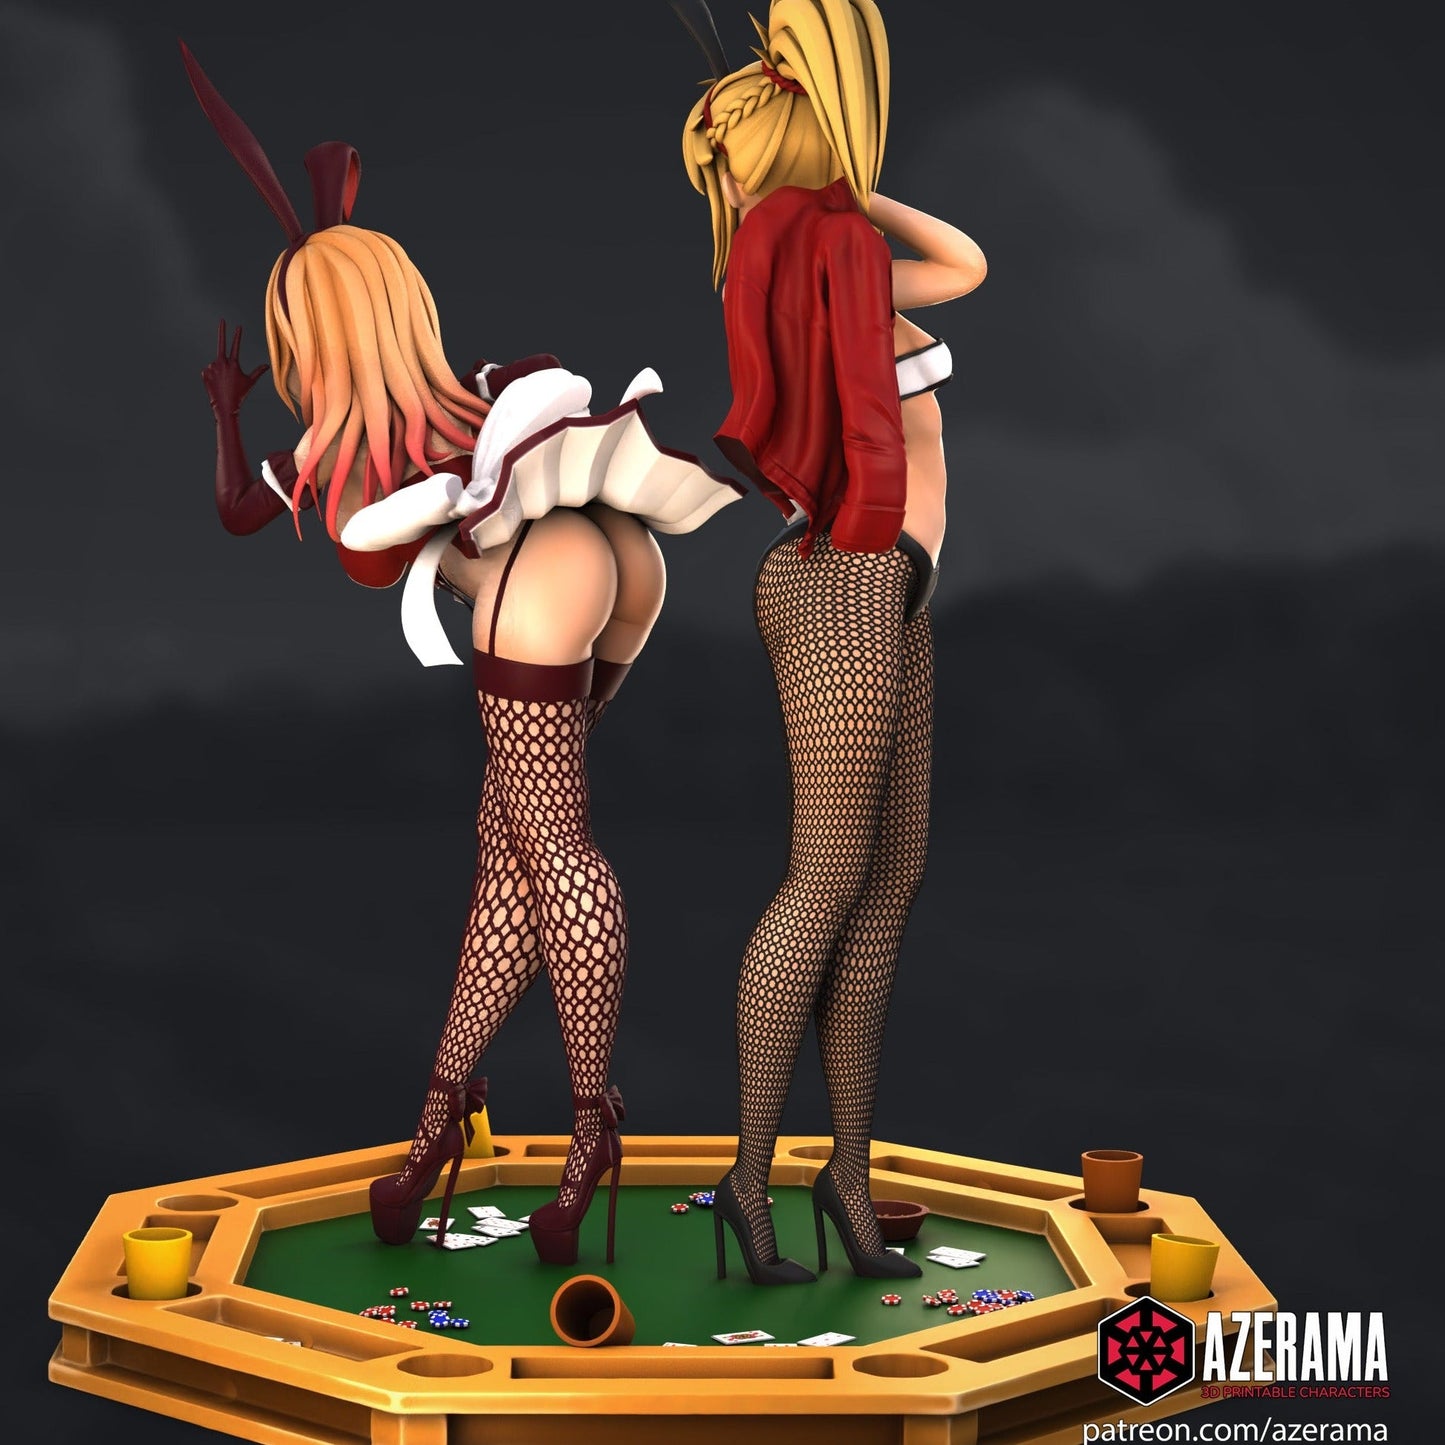 Resin Model Kit Bunny girls Mordred and Marin 3d Printed Figurine Collectable Fanart DIY by Azerama